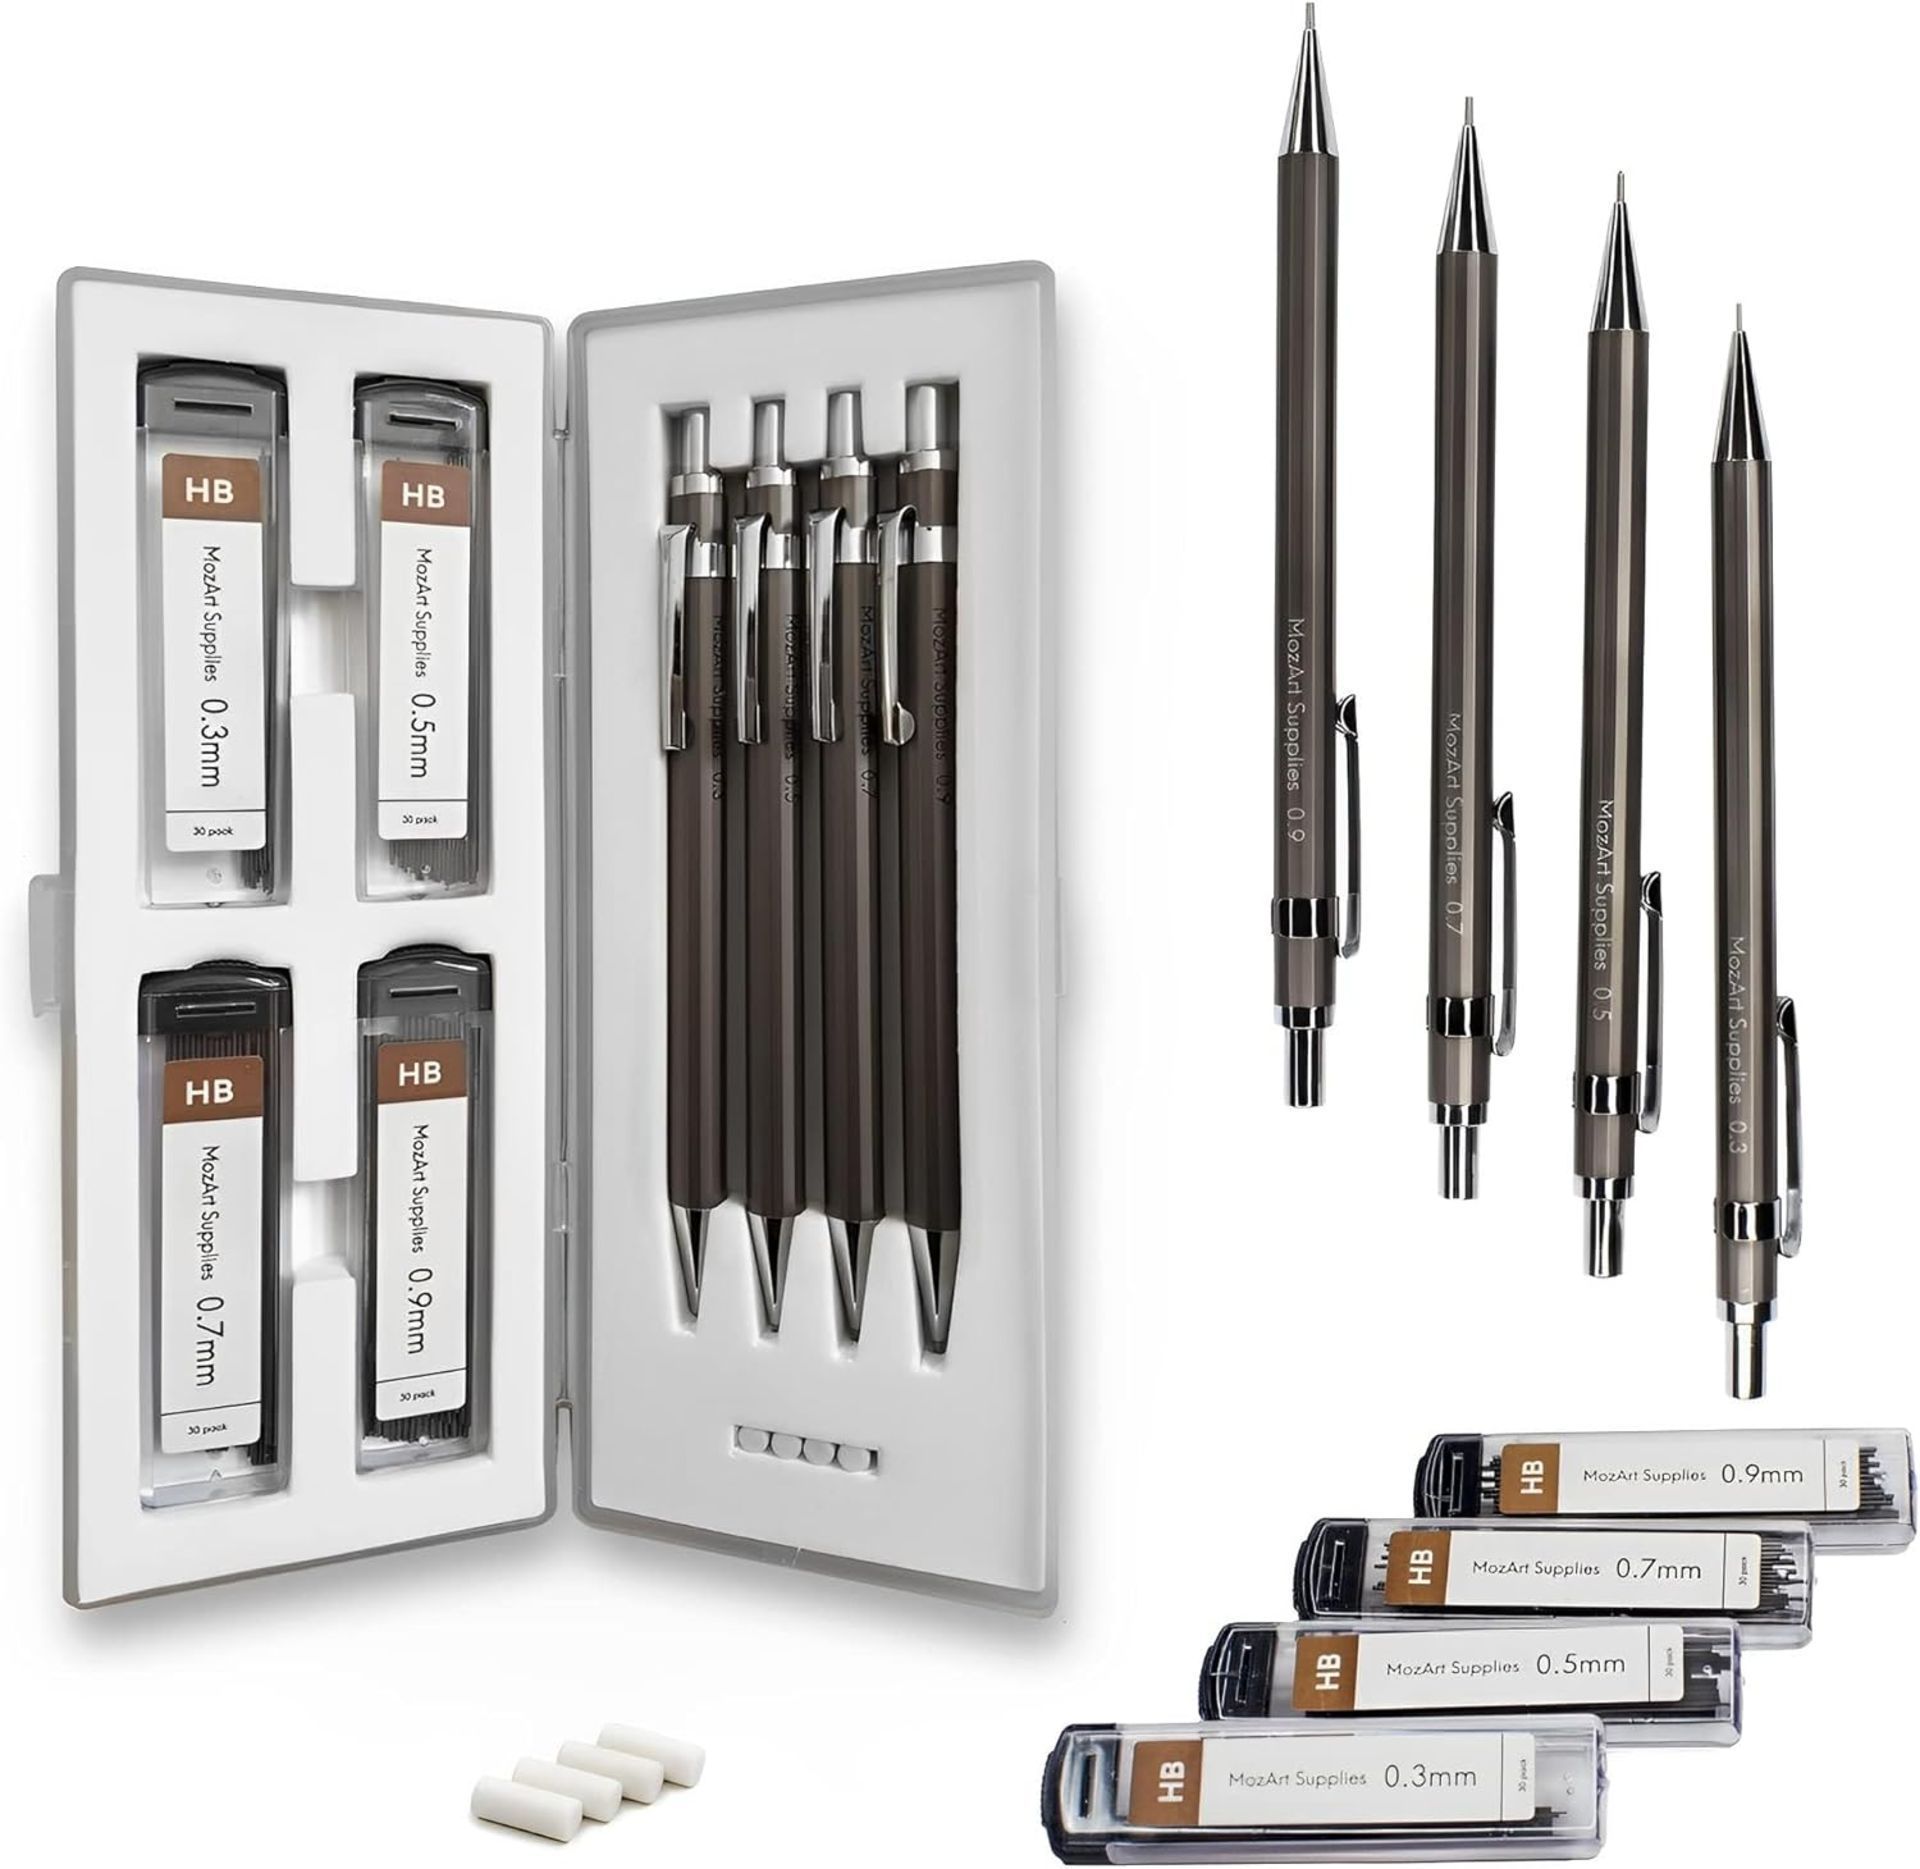 20 X BRAND NEW PREMIUM MECHANICAL PENCIL SETS INCLUDING 4 X PENCILS WITH REPLACEMENT LEAD AND